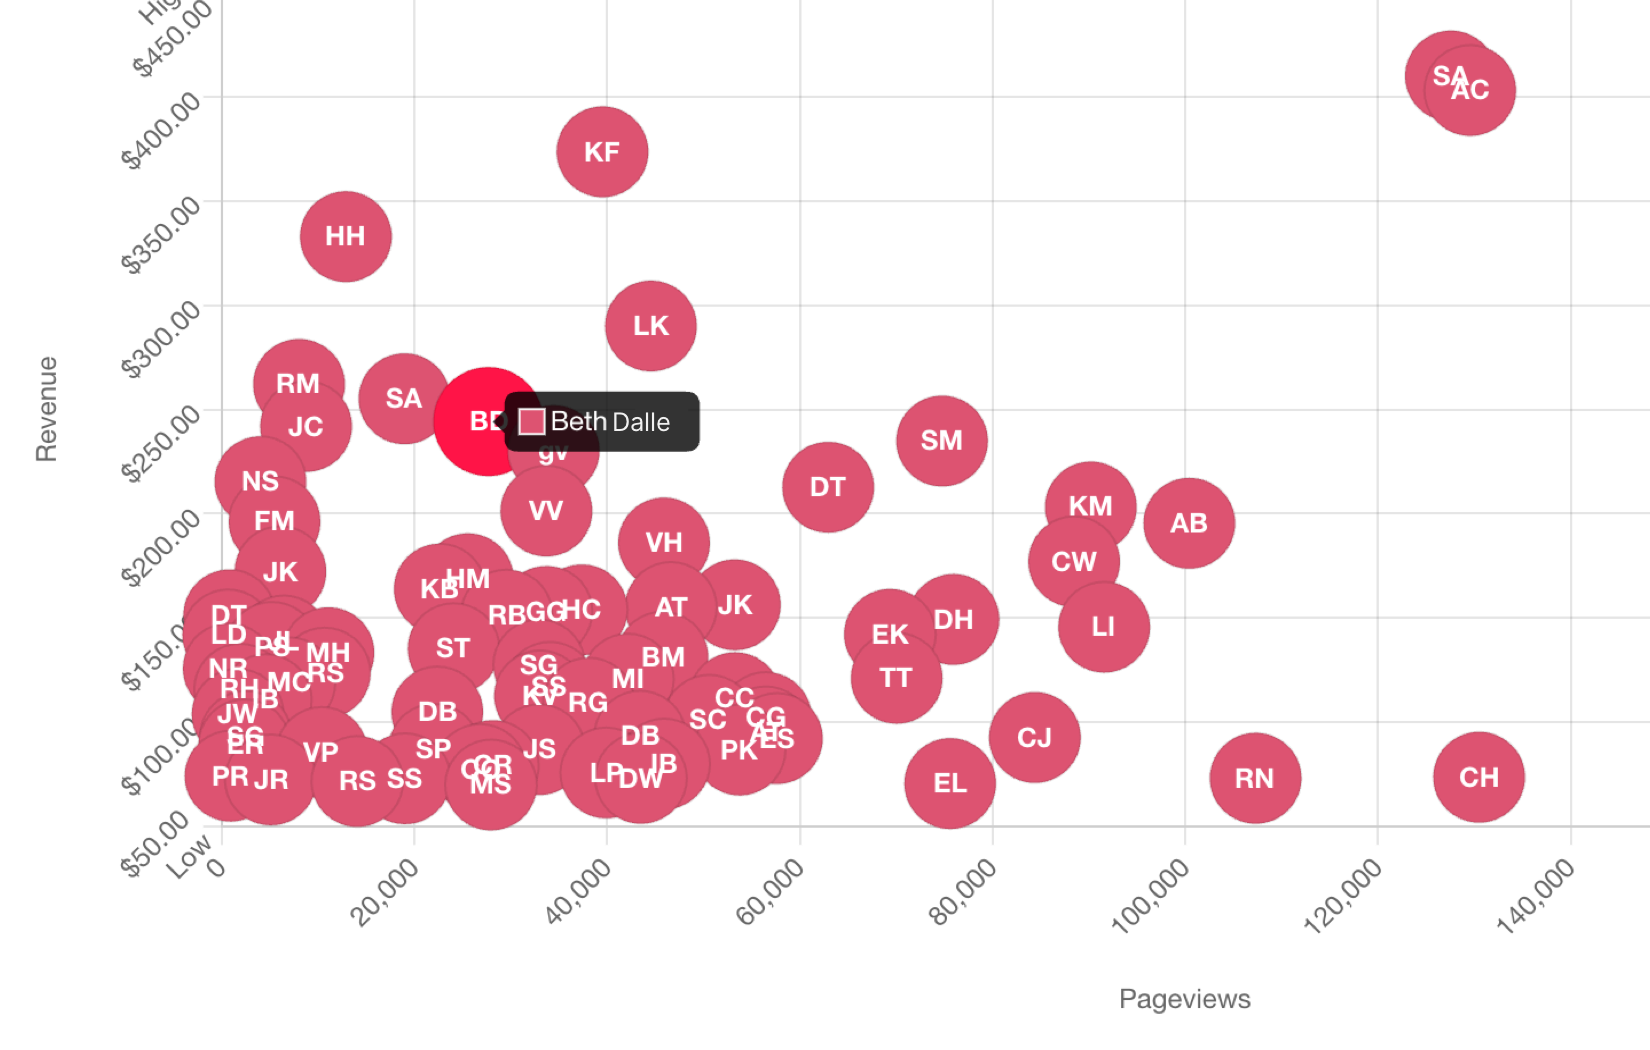 Visualize which authors generate more money with fewer pageviews (and vice-versa)